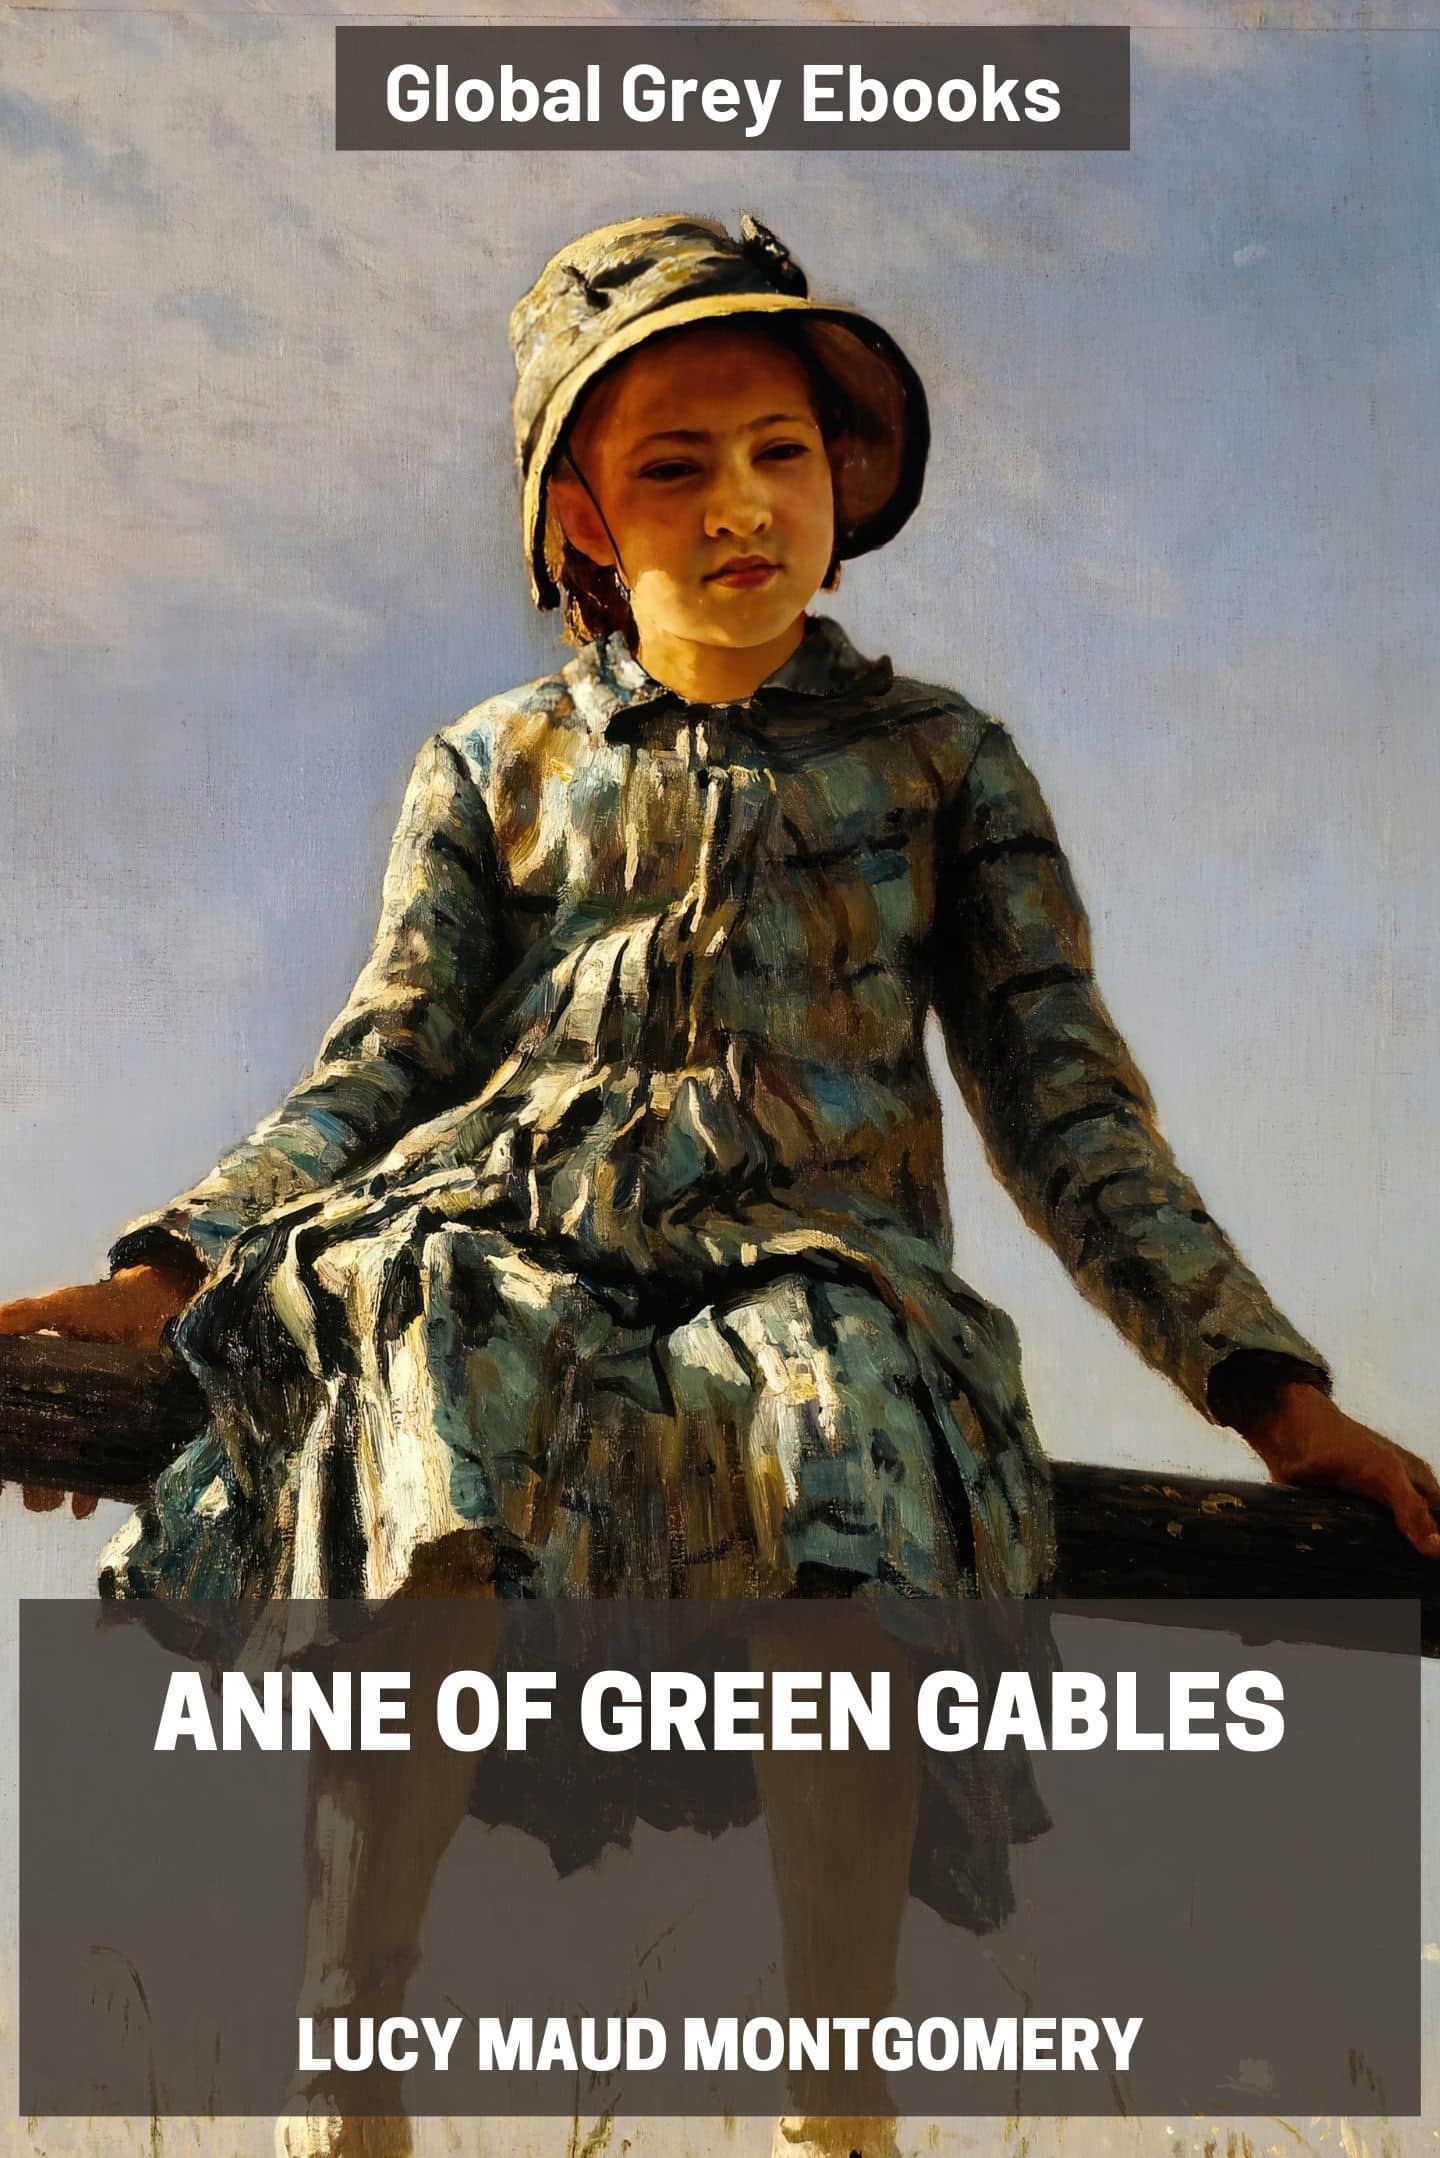 Anne of Green Gables by Lucy Maud Montgomery - Complete text